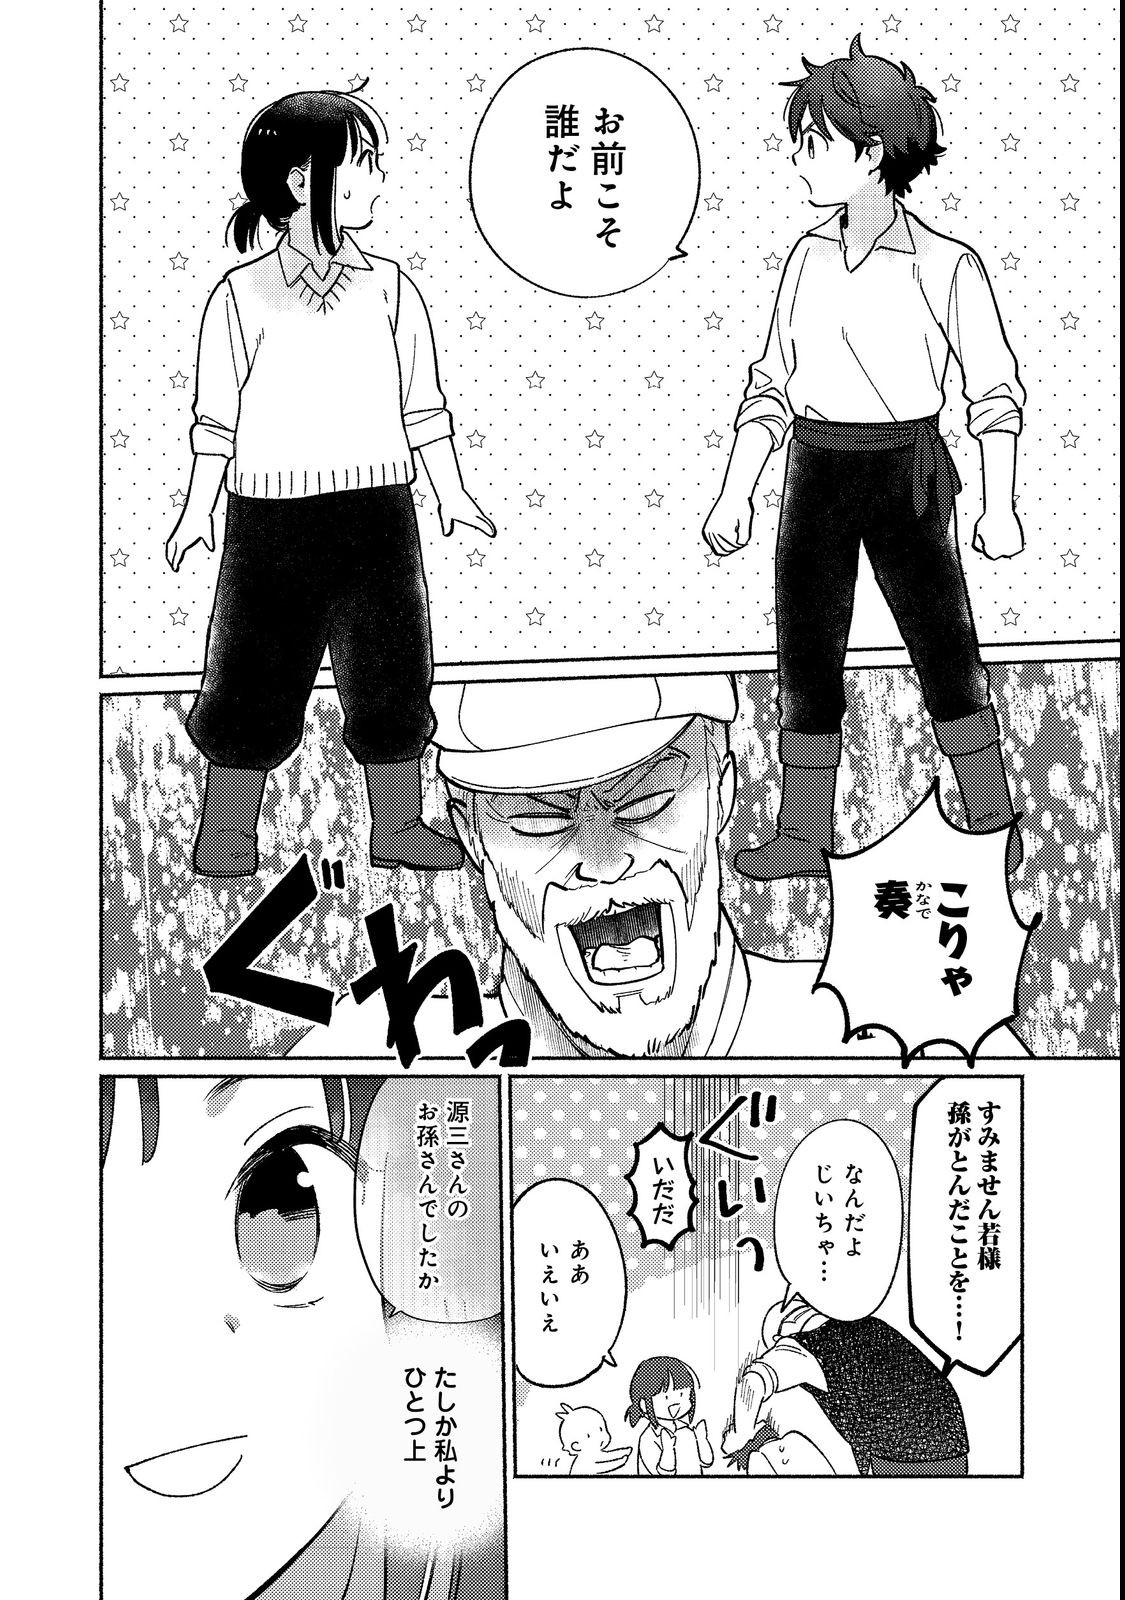 I’m the White Pig Nobleman 第18.1話 - Page 2